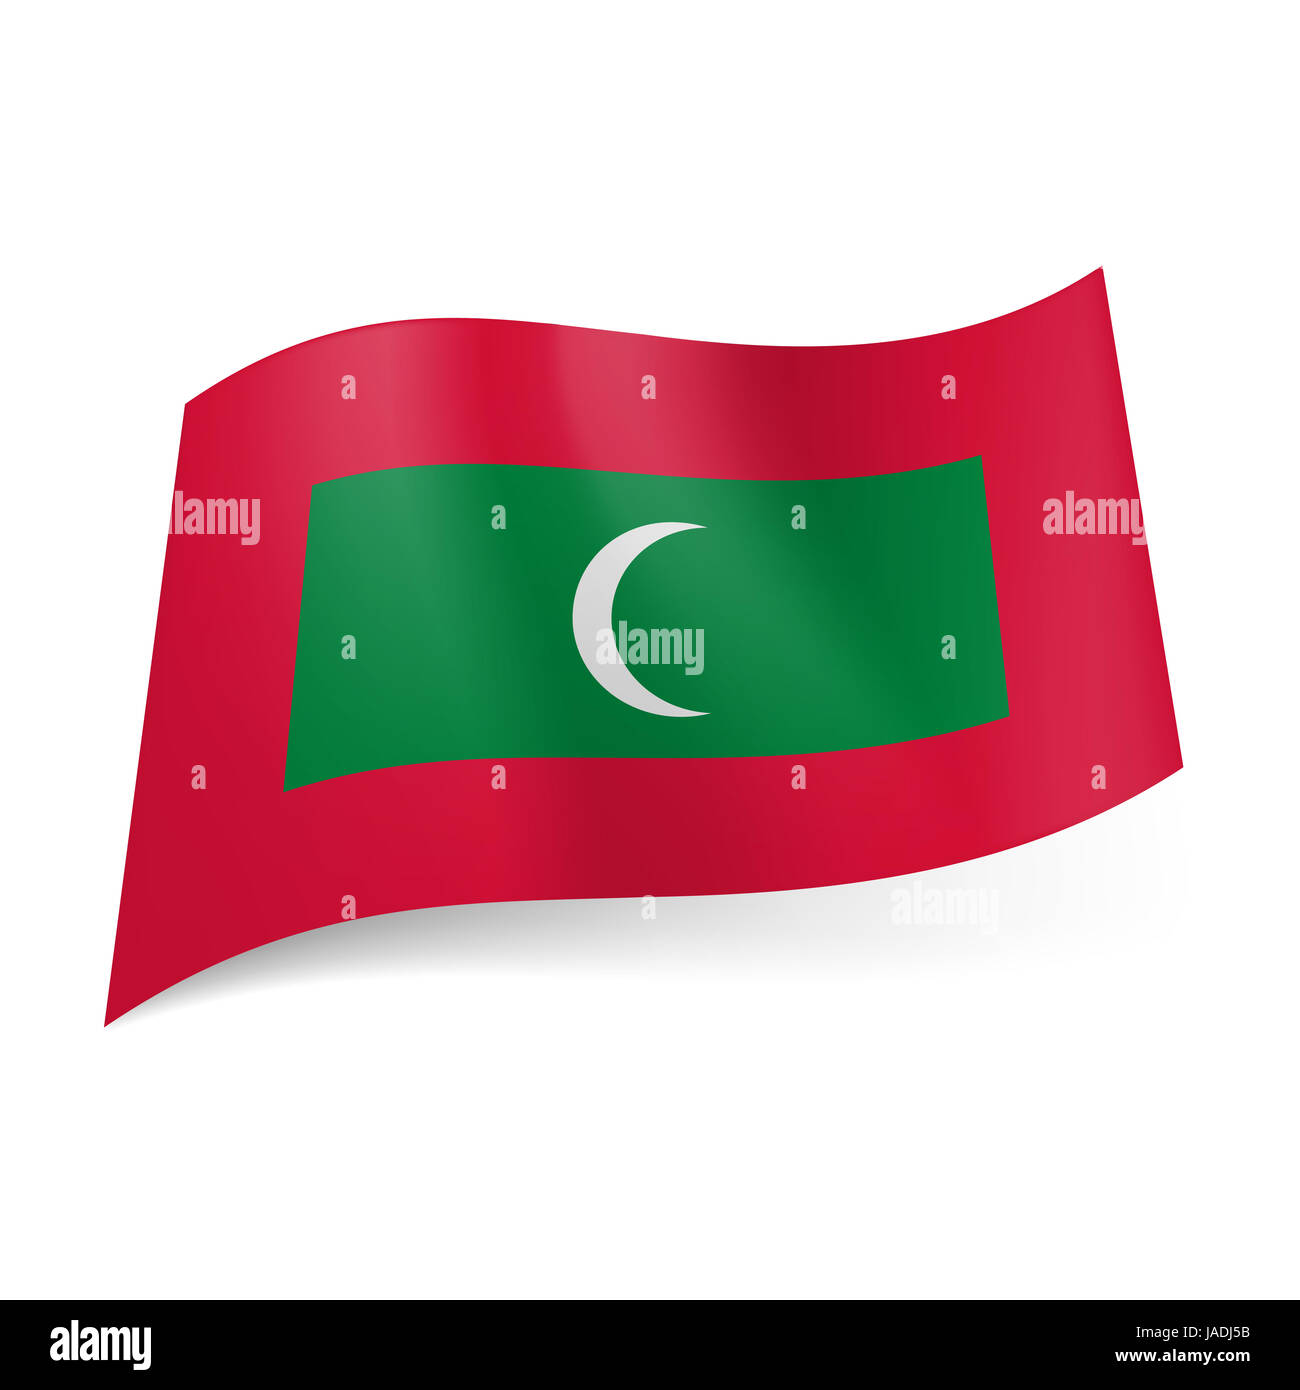 National flag of Republic of the Maldives: green rectangle with white crescent moon on red background. Stock Photo